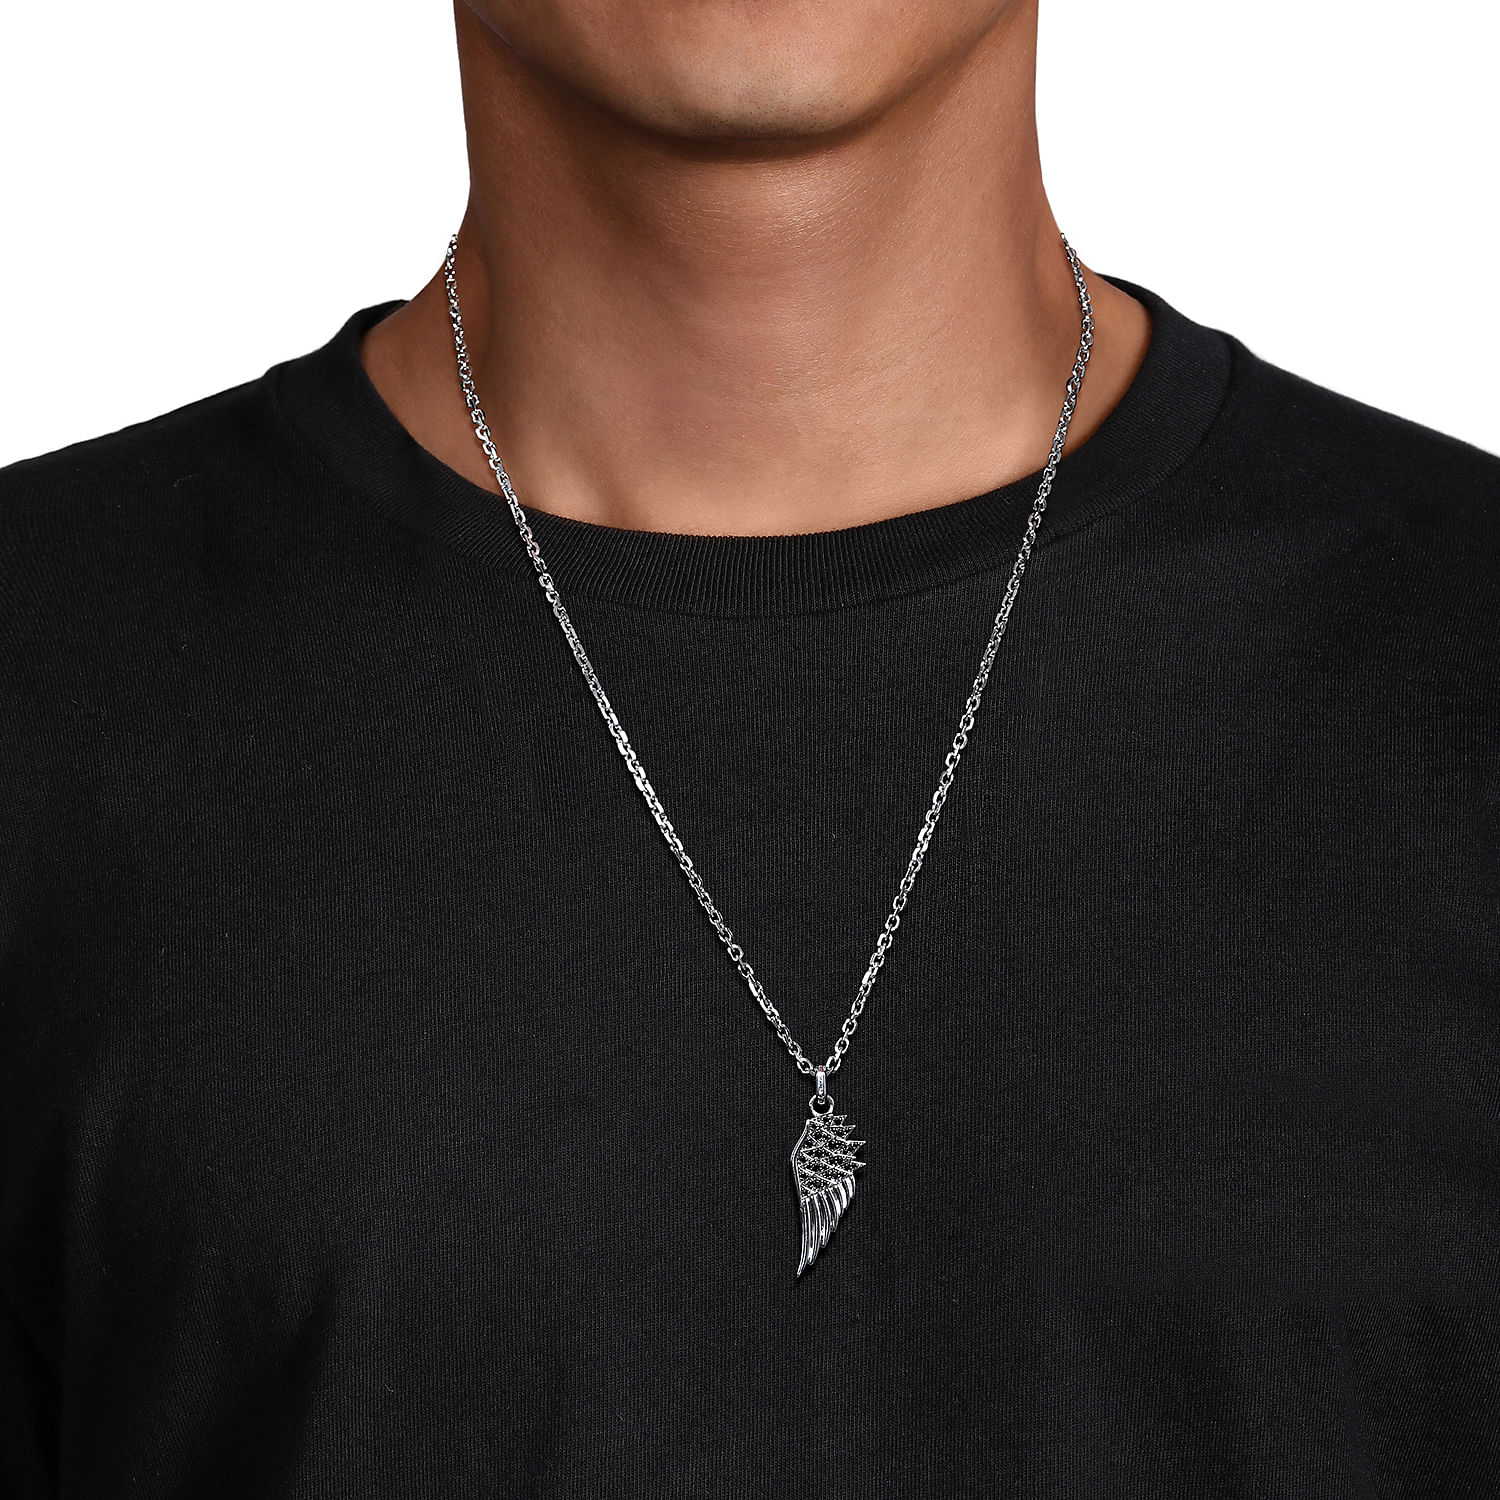 22 Inch 925 Sterling Silver Black Spinel Wing Solid Mens Link Chain Necklace